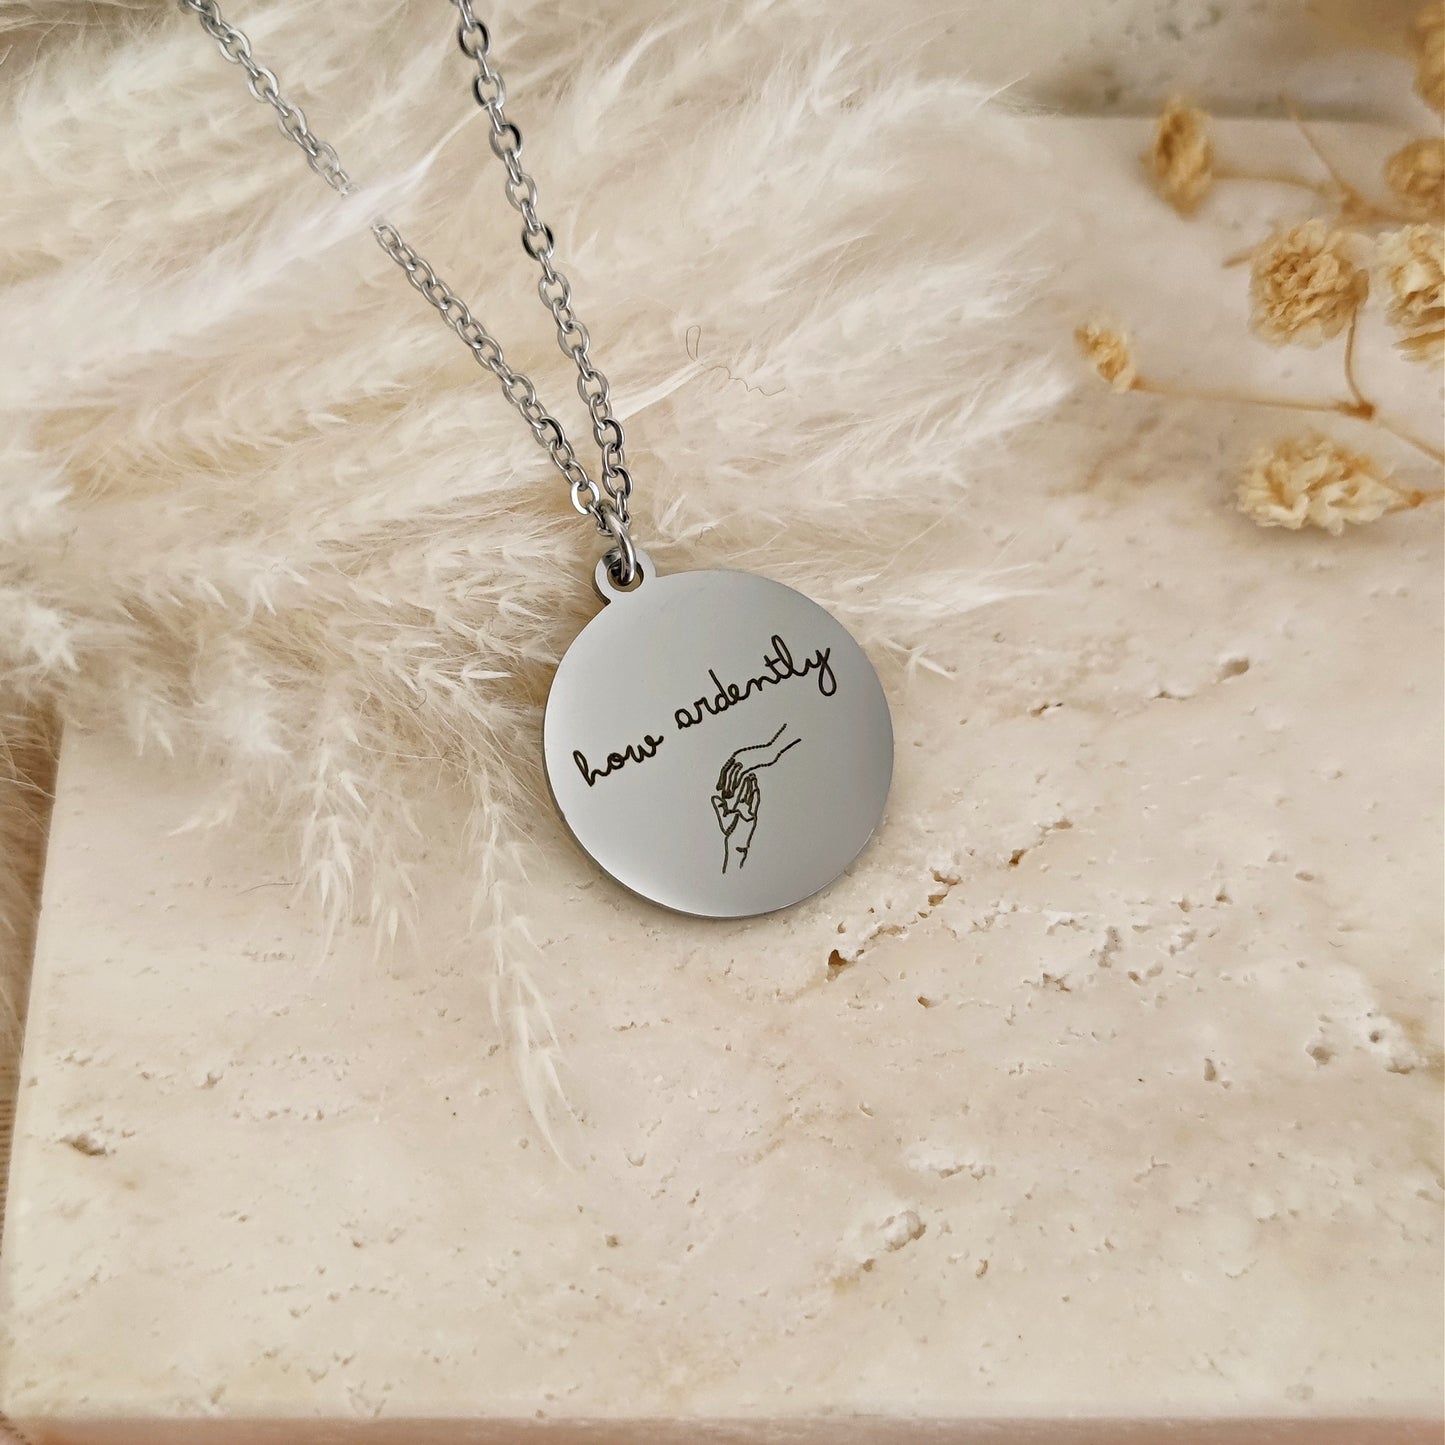 How Ardently Pride & Prejudice Necklace, Mr. Darcy Bookish Necklace, Jane Austen inspired Necklace, Light Academia Engraved Necklace